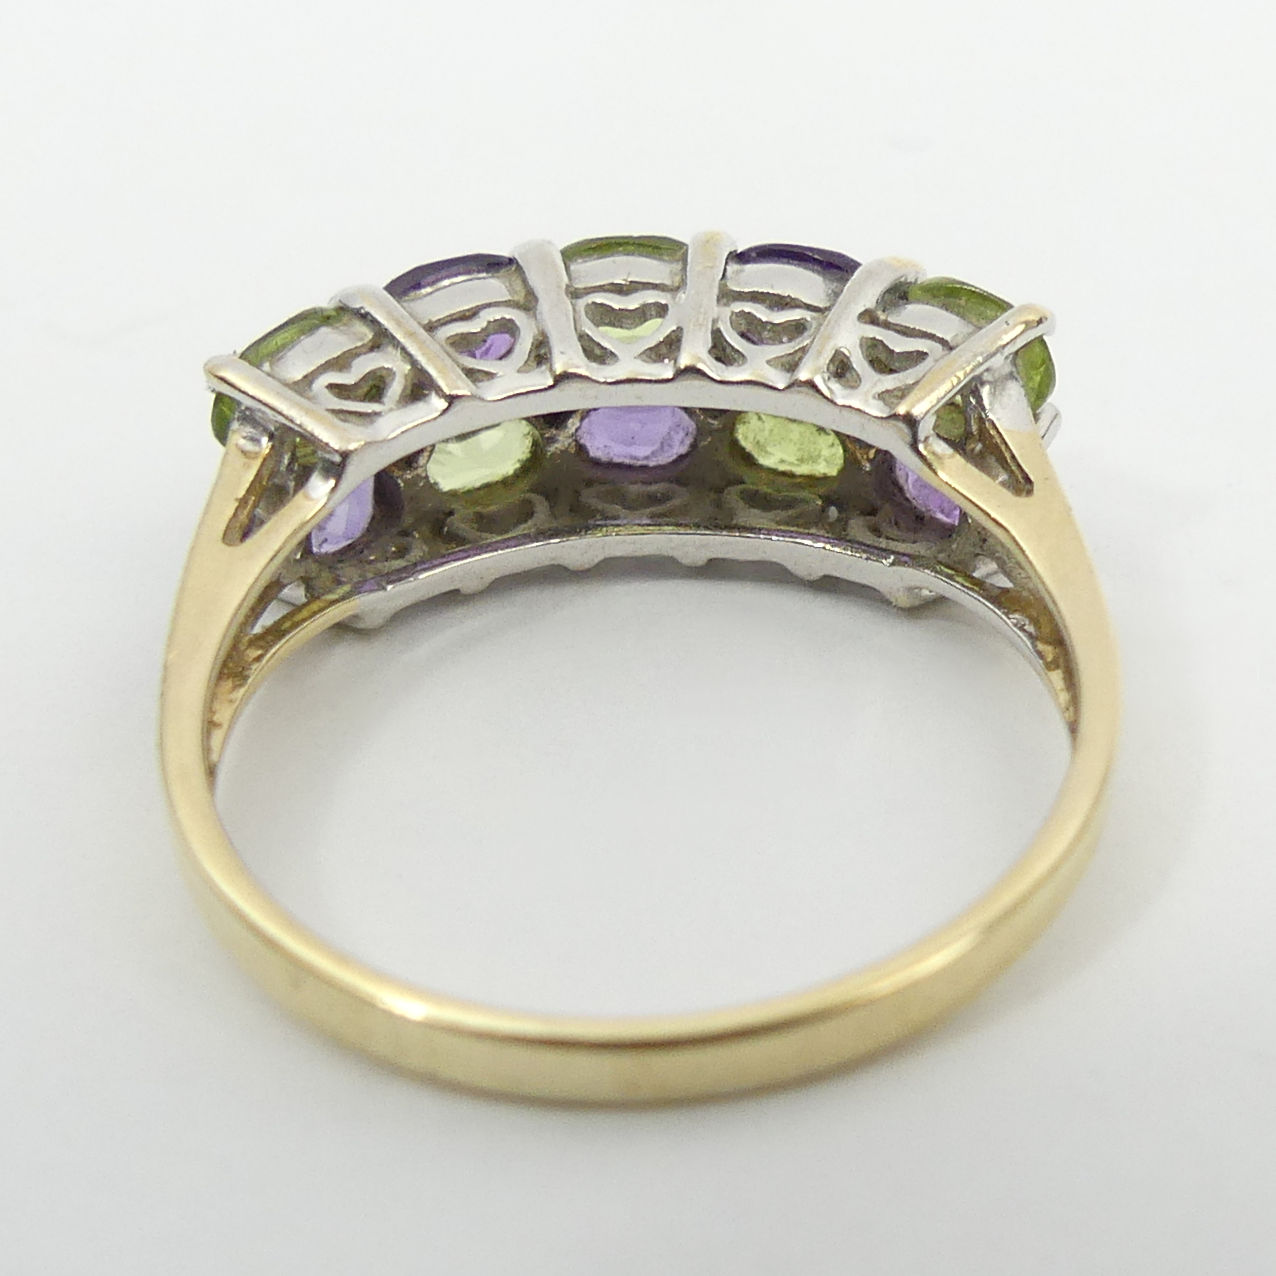 9ct gold peridot, amethyst and diamond ring, 2.4 grams, 6.6mm, size M 1/2. UK Postage £12. - Image 4 of 6